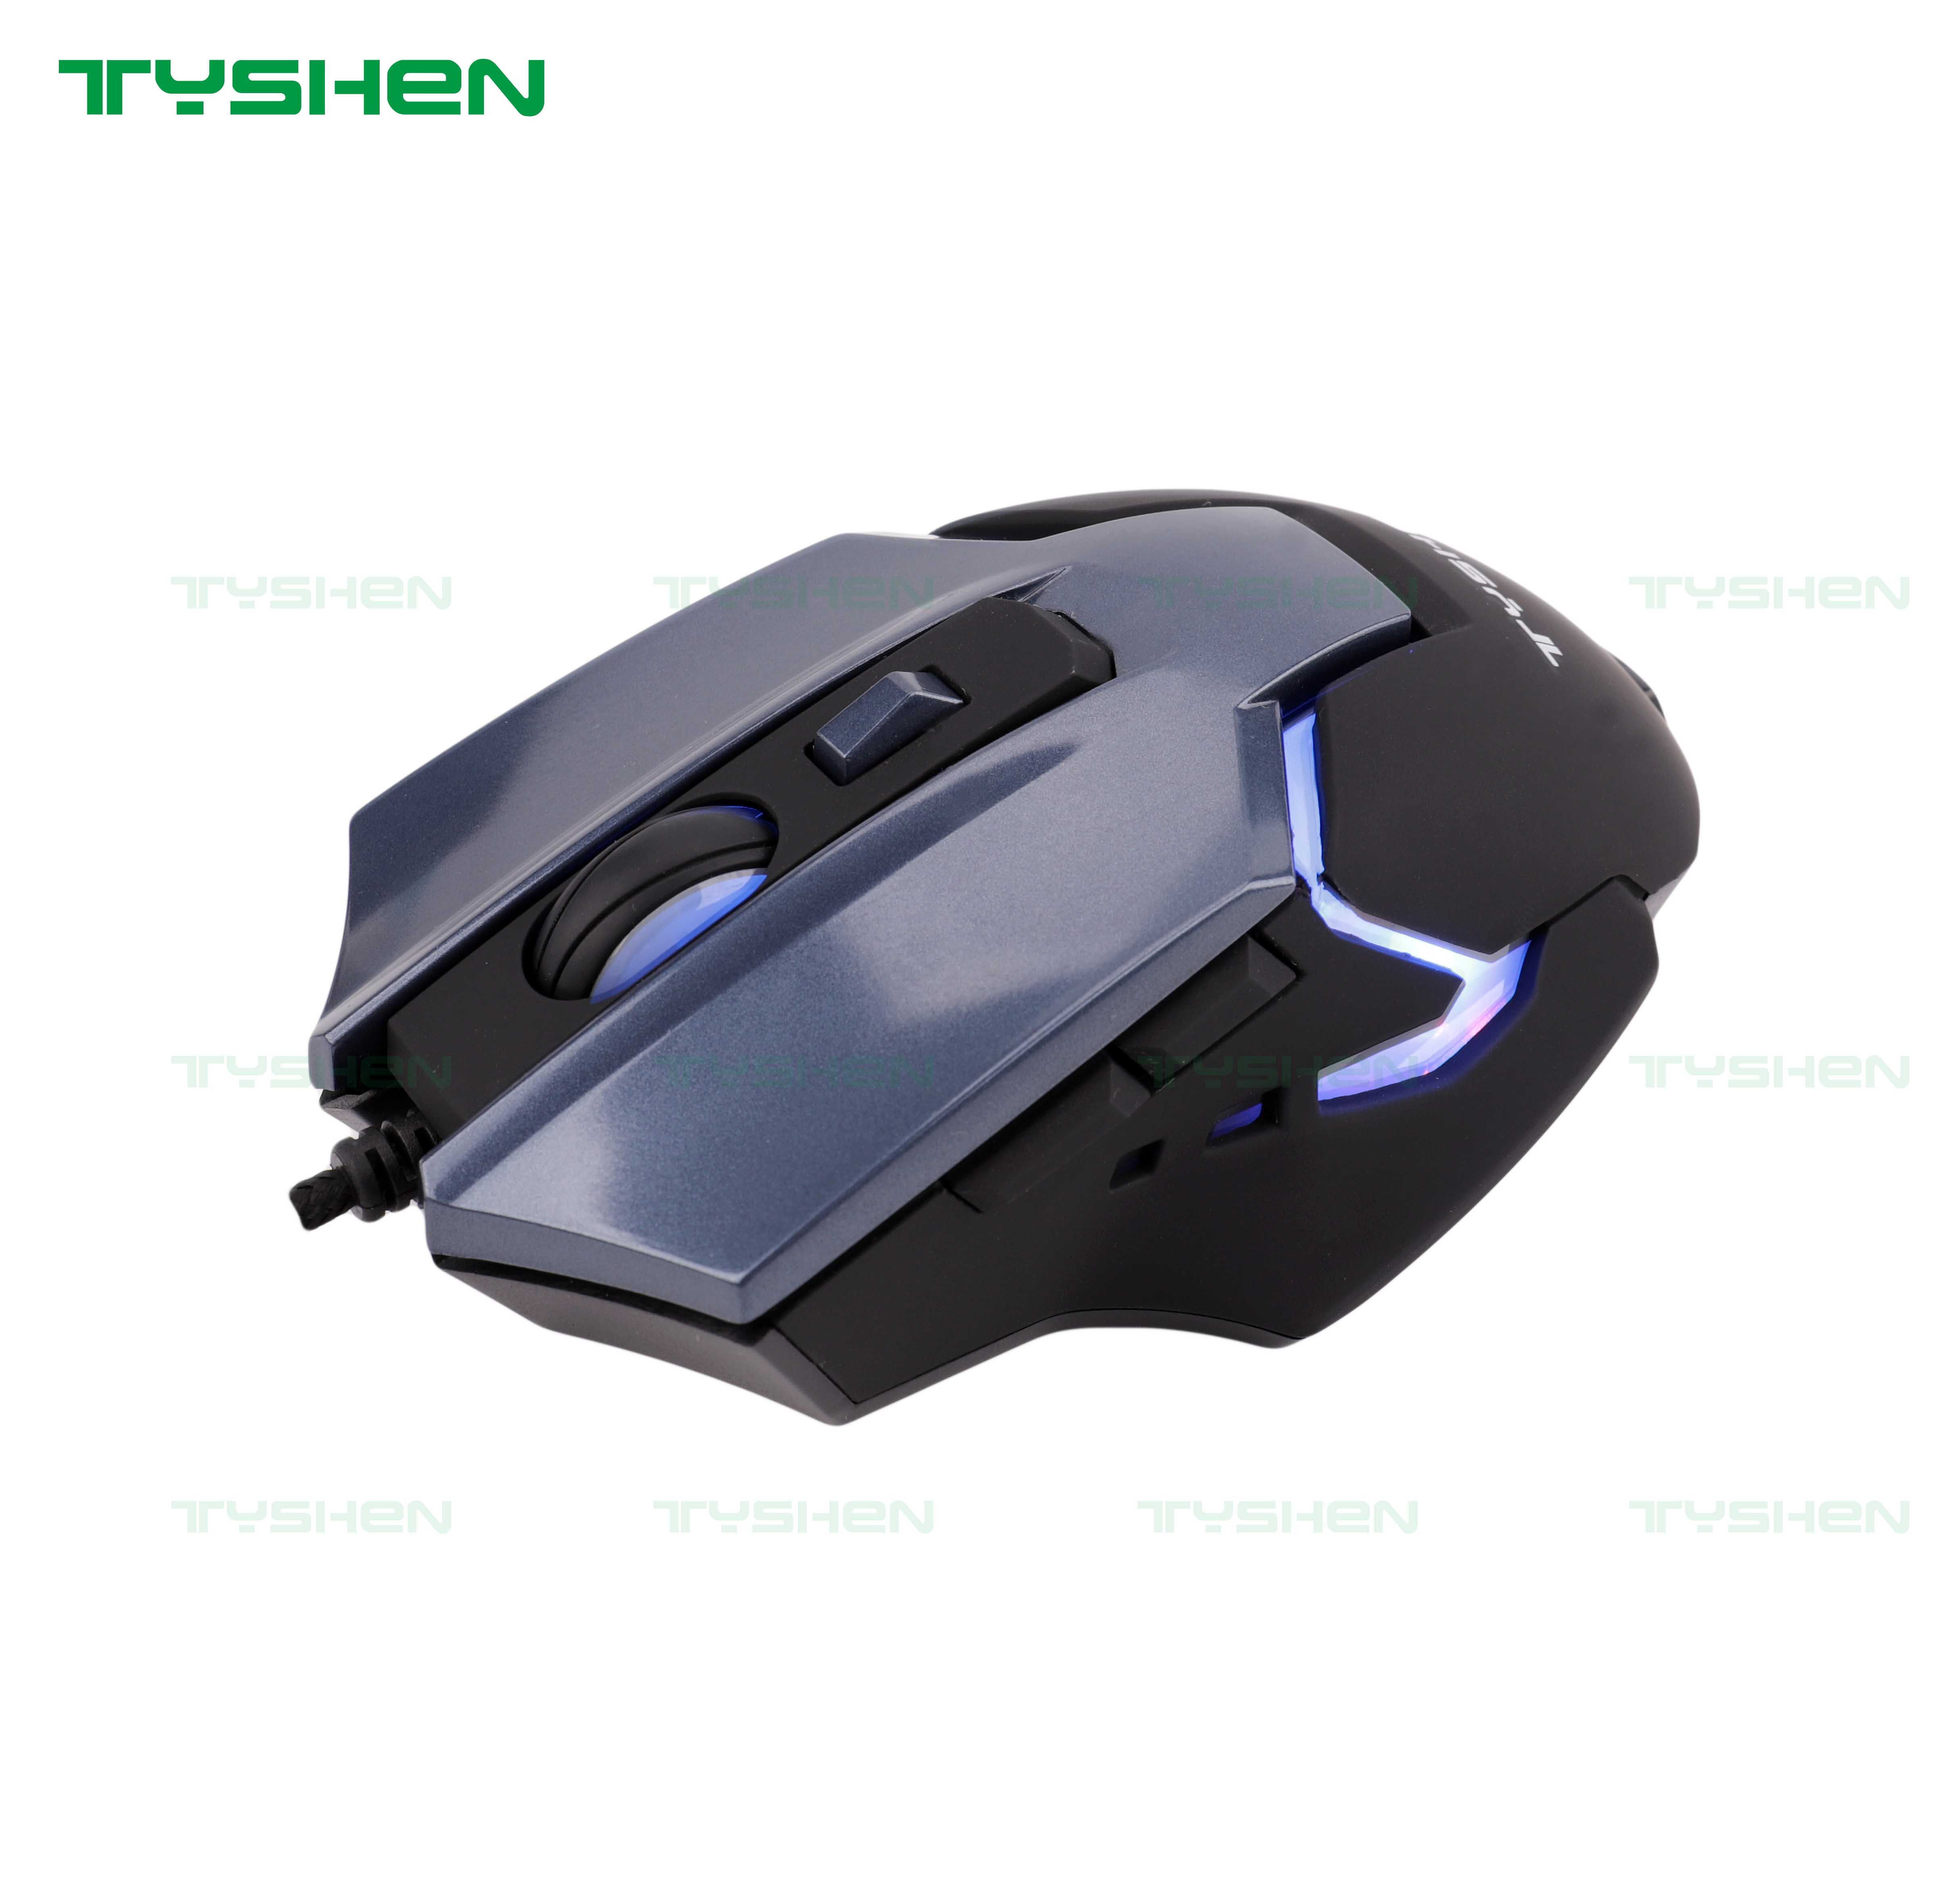 Computer Mouse/USB Wired Gaming Mice for PC Mouse Msg-X1 Gaming Mouse 7 Buttons 3200 Dpi Black